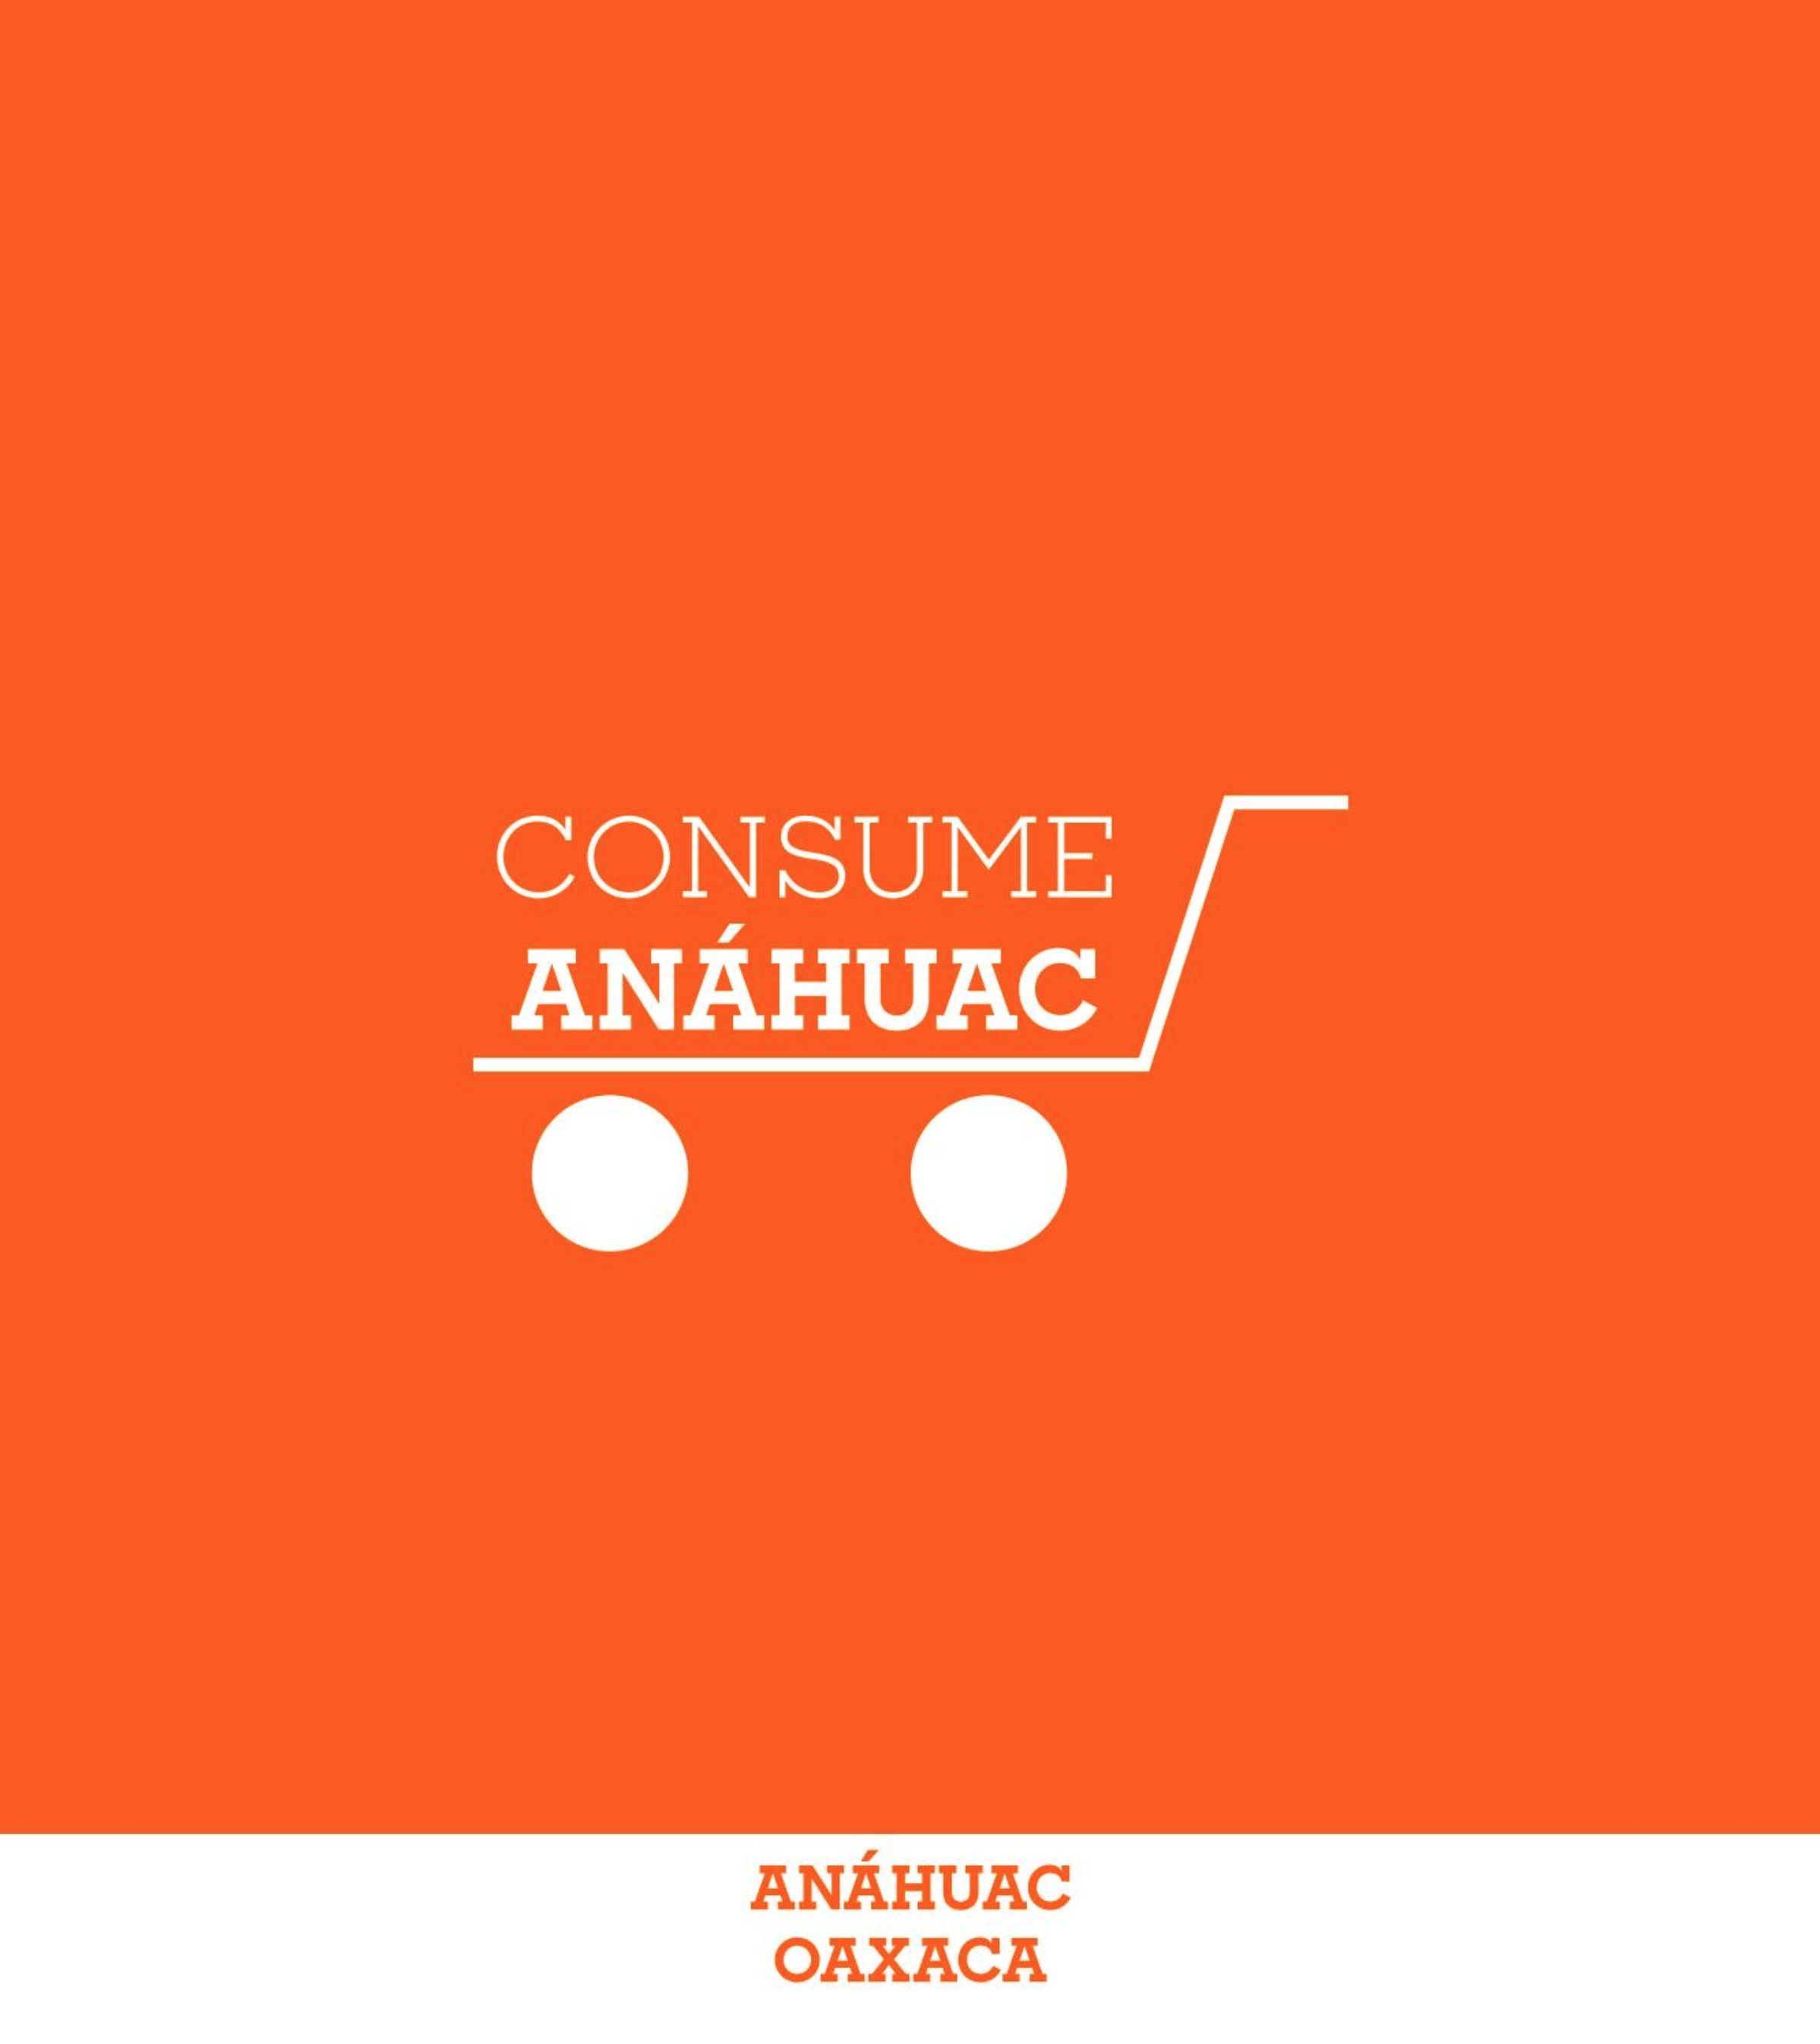 Consume Anáhuac